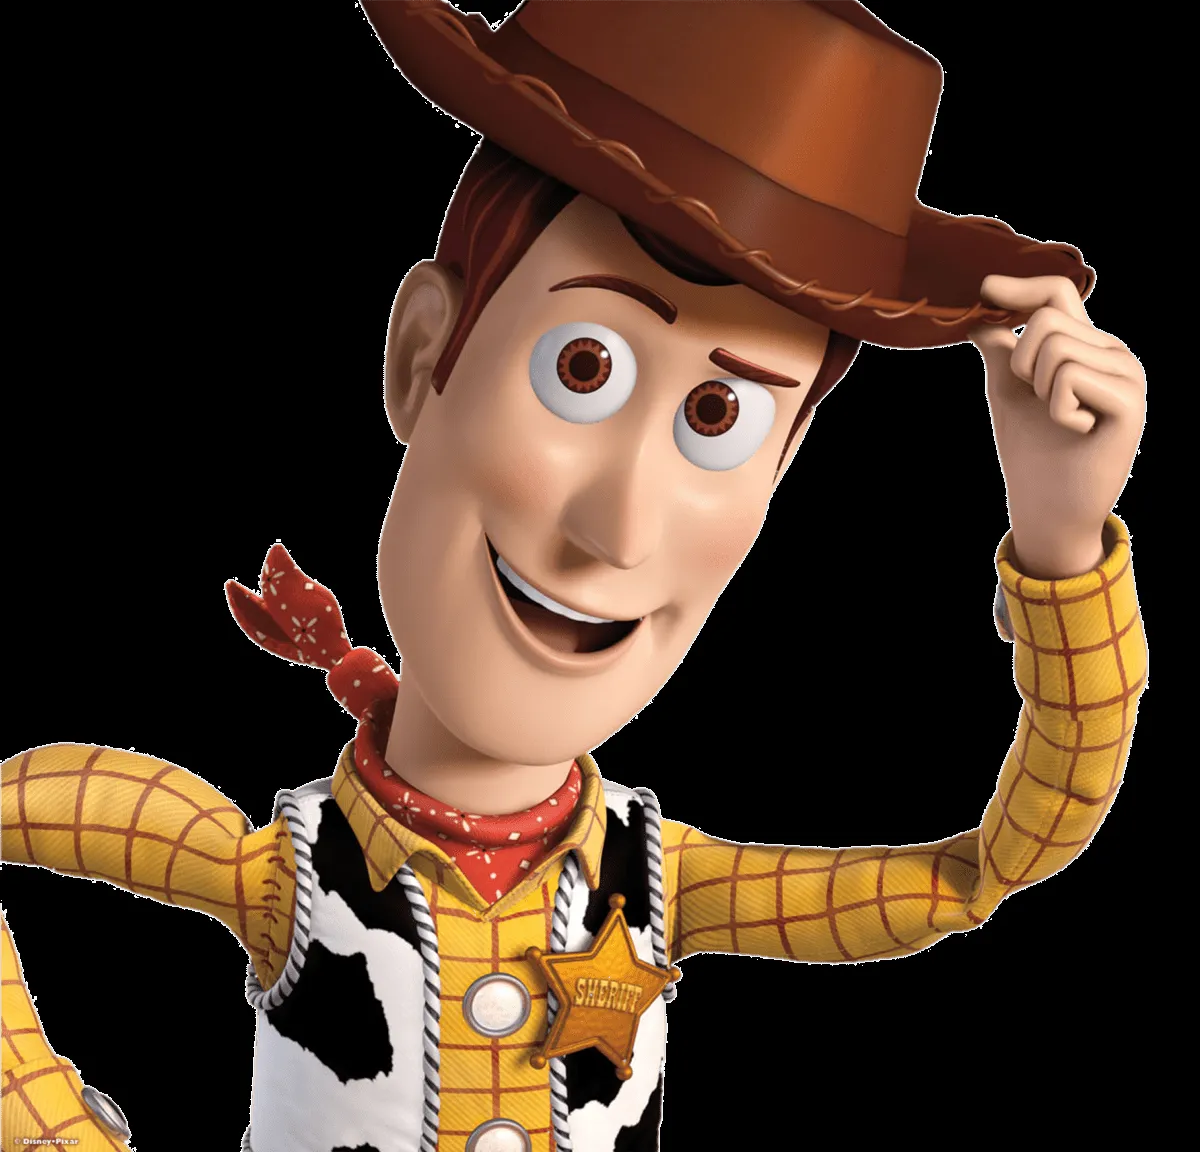 Woody toy story-Images and pictures to print